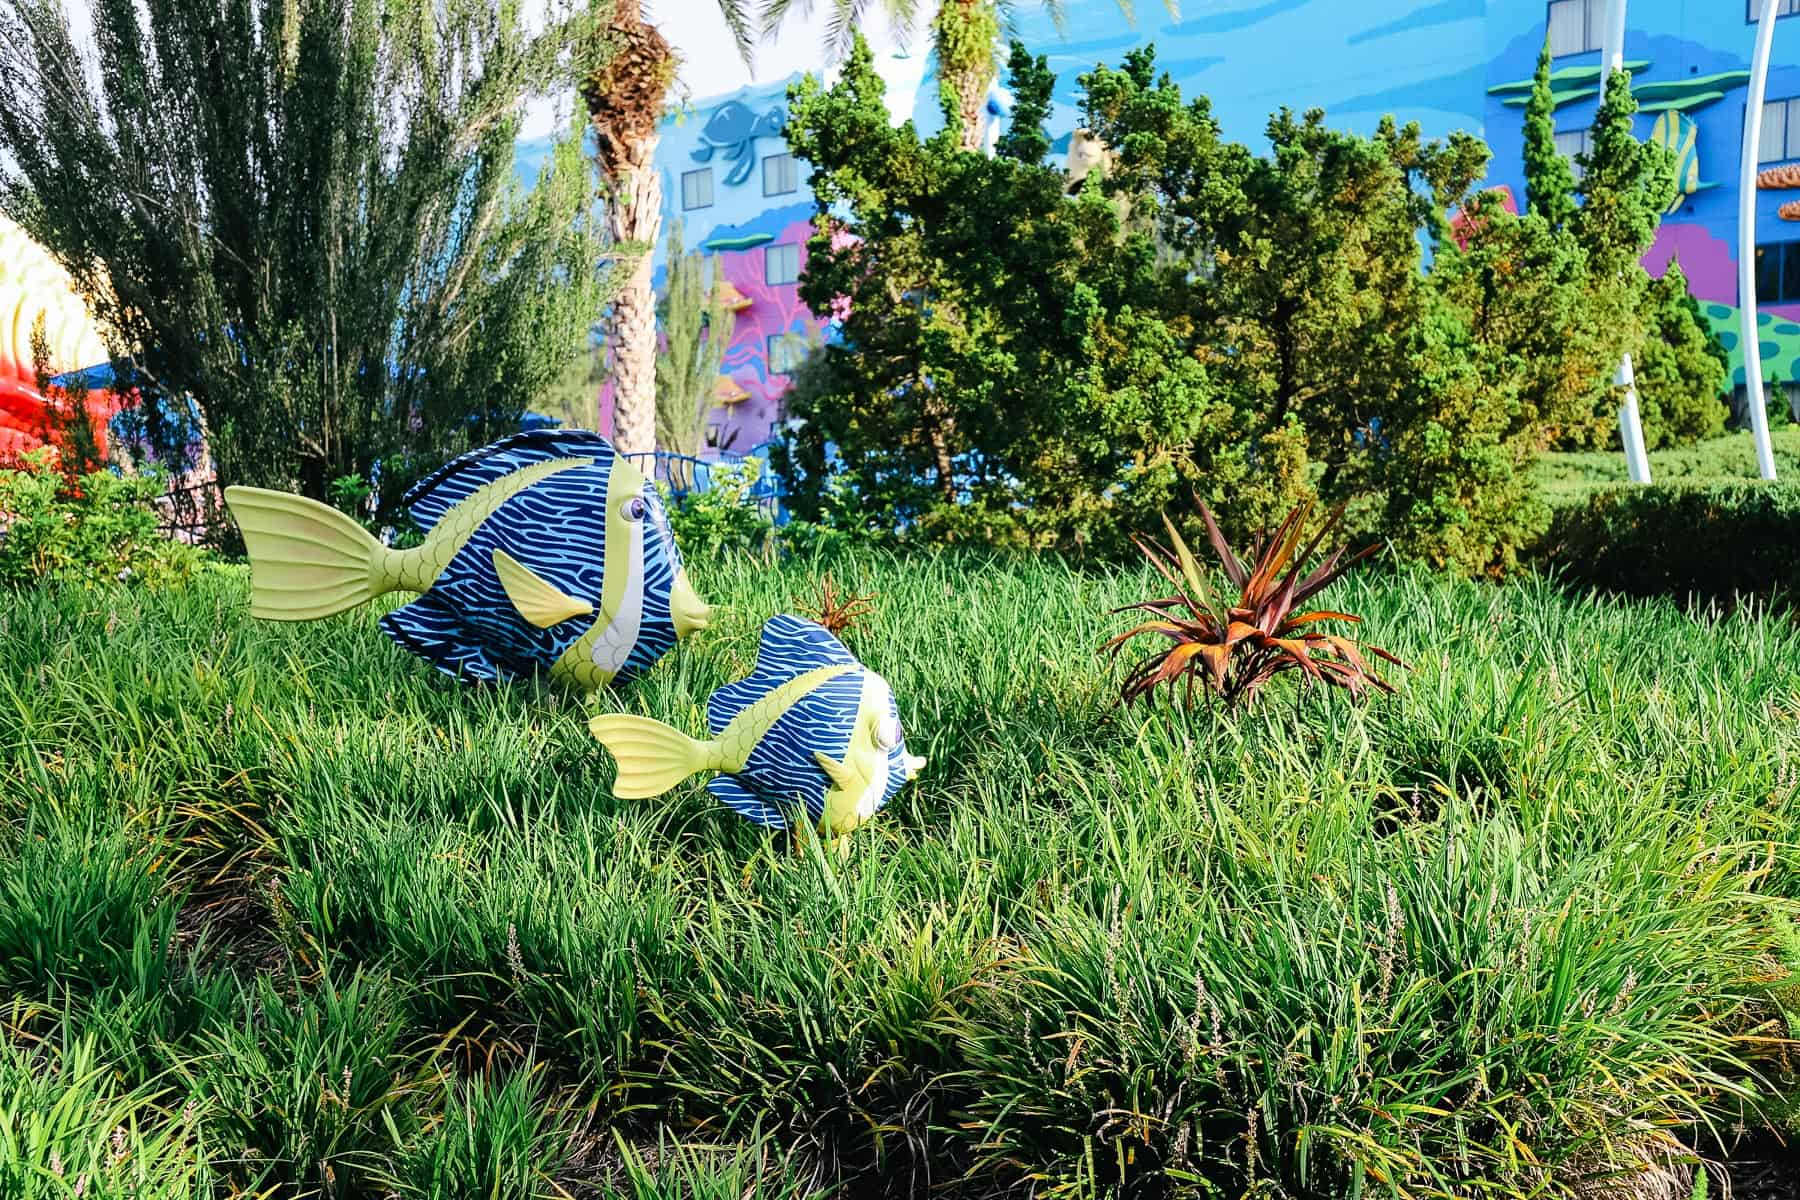 Blue and yellow decorative fish in large green grass meant to resemble the sea. 